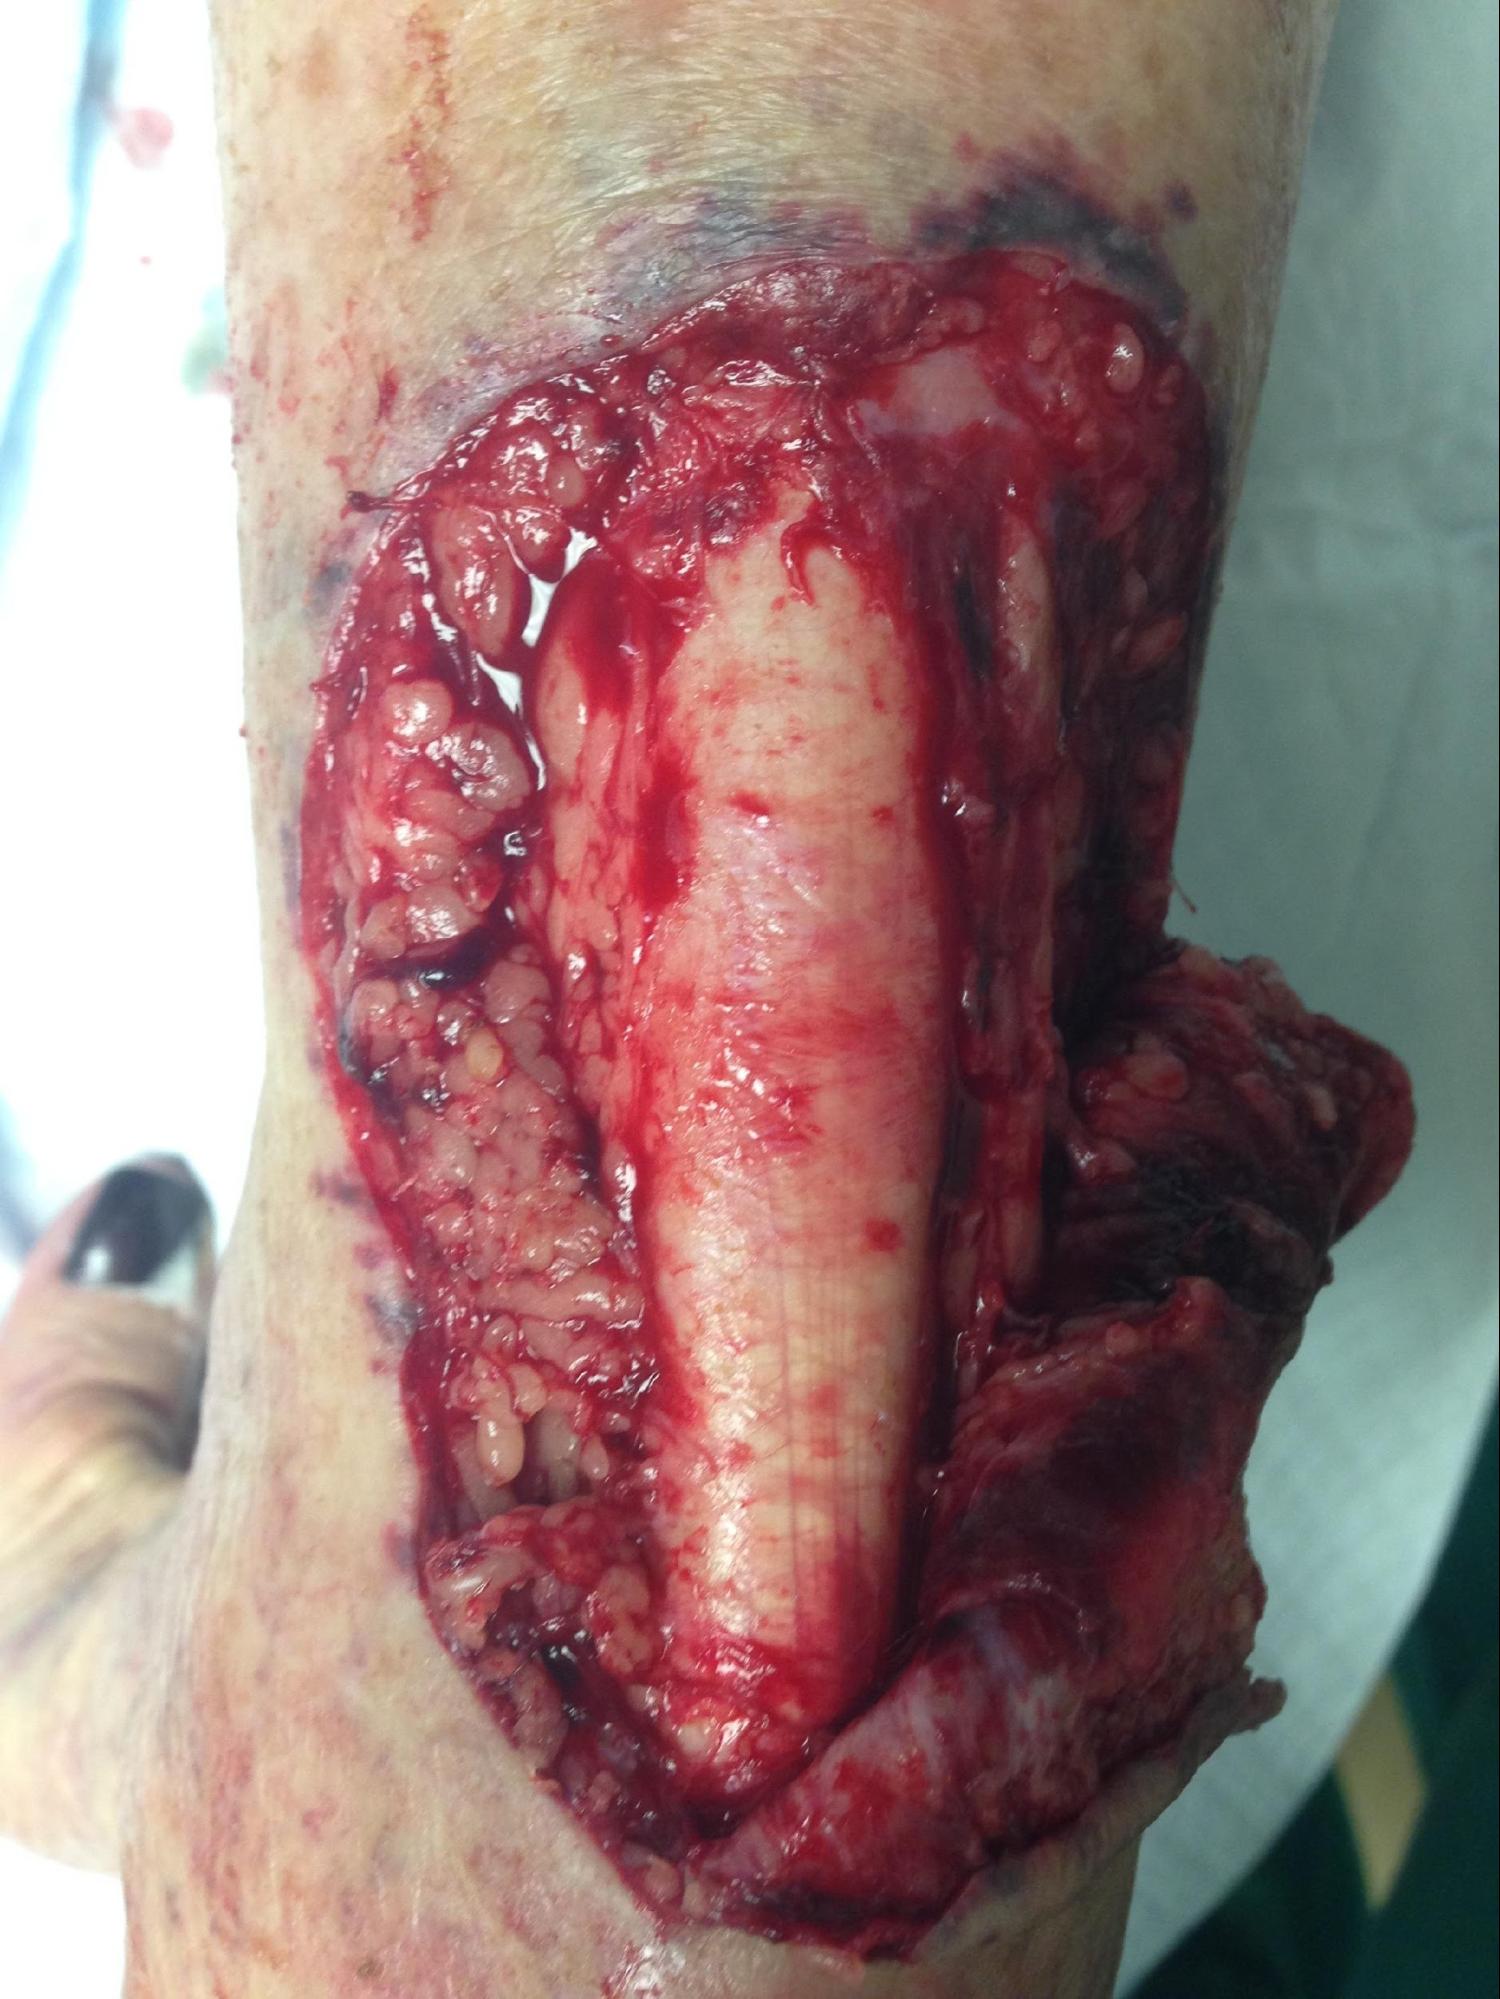 <p>Laceration of the Posterior Ankle. Full-thickness skin laceration of the posterior ankle exposing the Achilles tendon.</p>